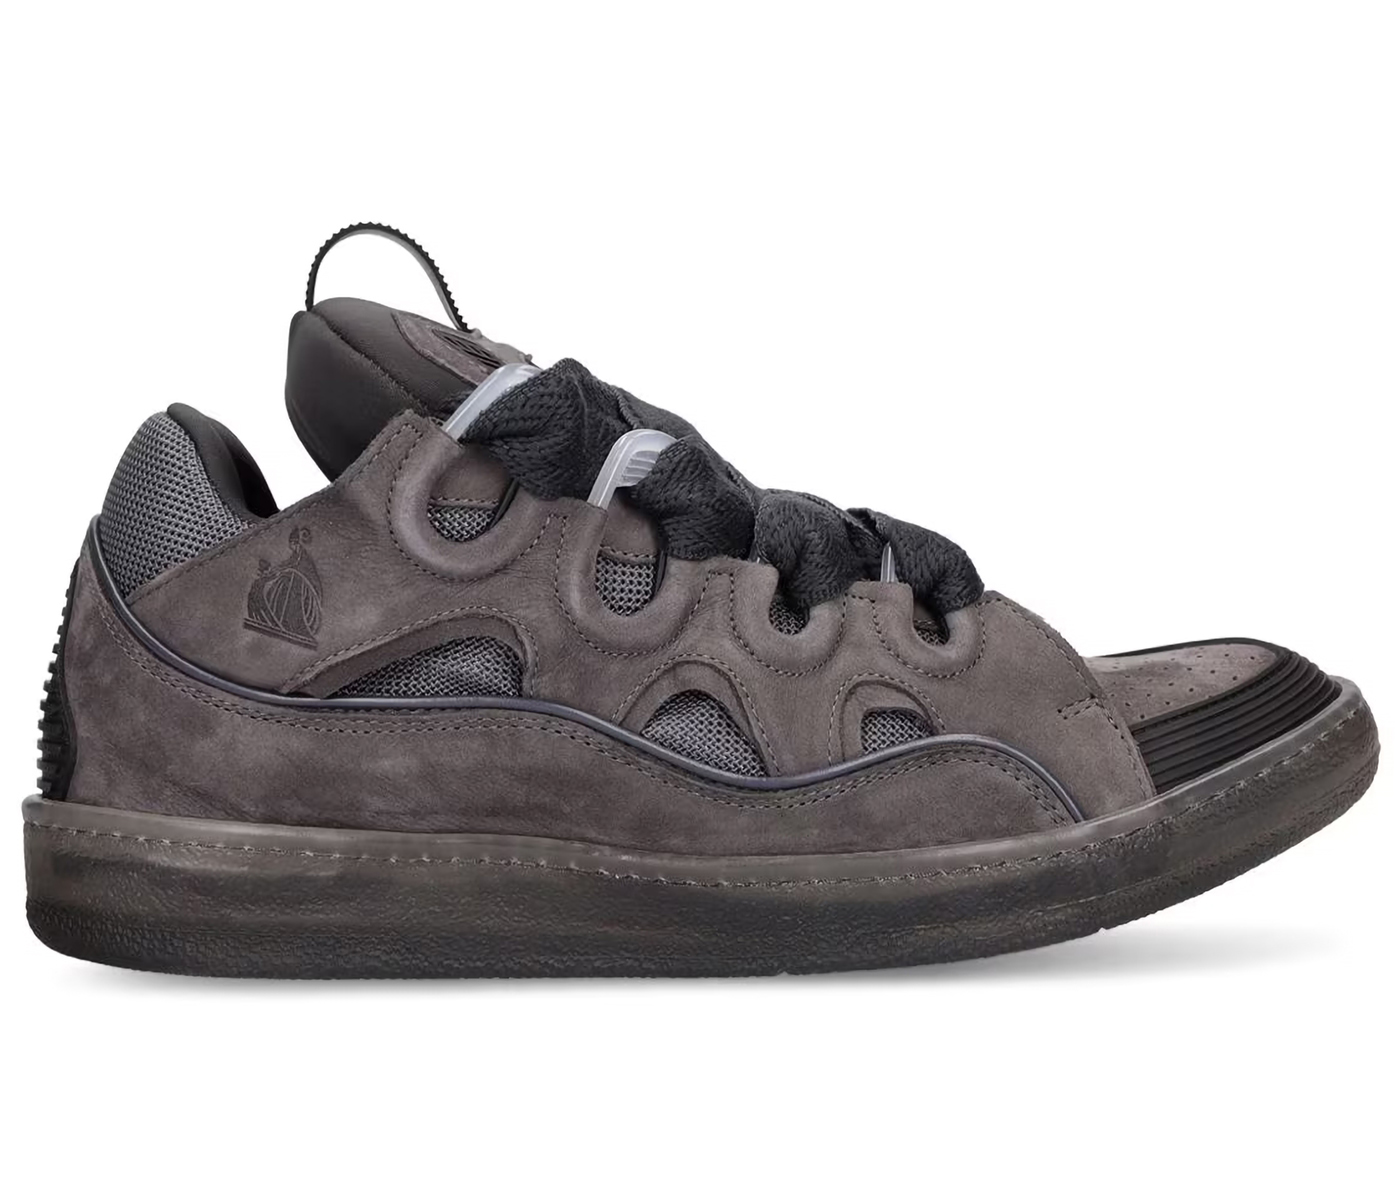 Lanvin Curb lace-up sneakers - Grey